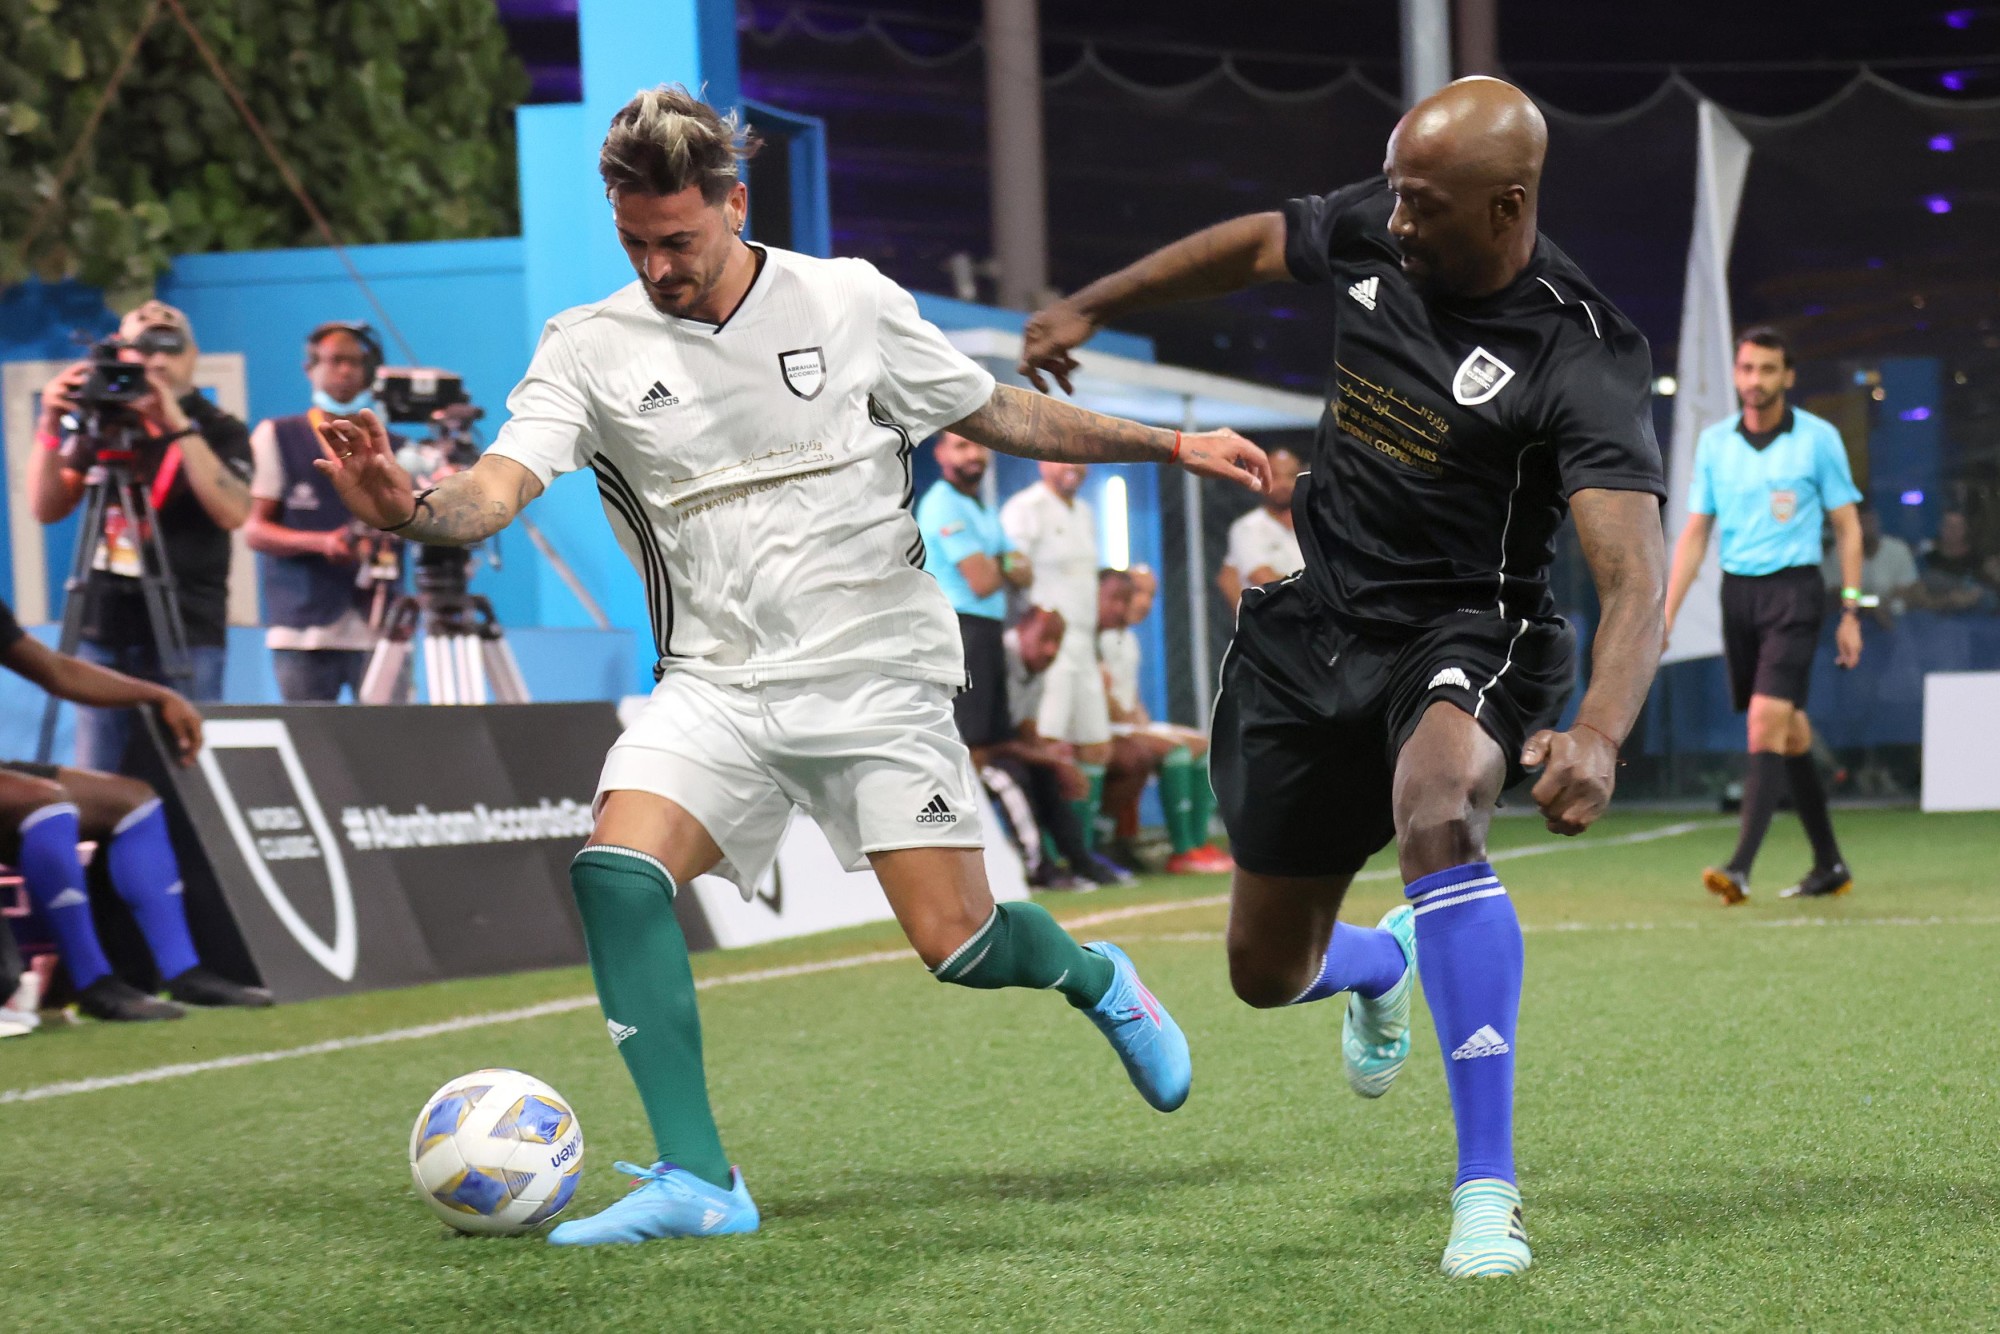 Former Israeli footballer and Abraham Accords team member Maor Buzaglo (L) in action against former French footballer and World Classic team member Claude Makélélé during an exhibition match for the Abraham Accords Games at the Sports, Fi